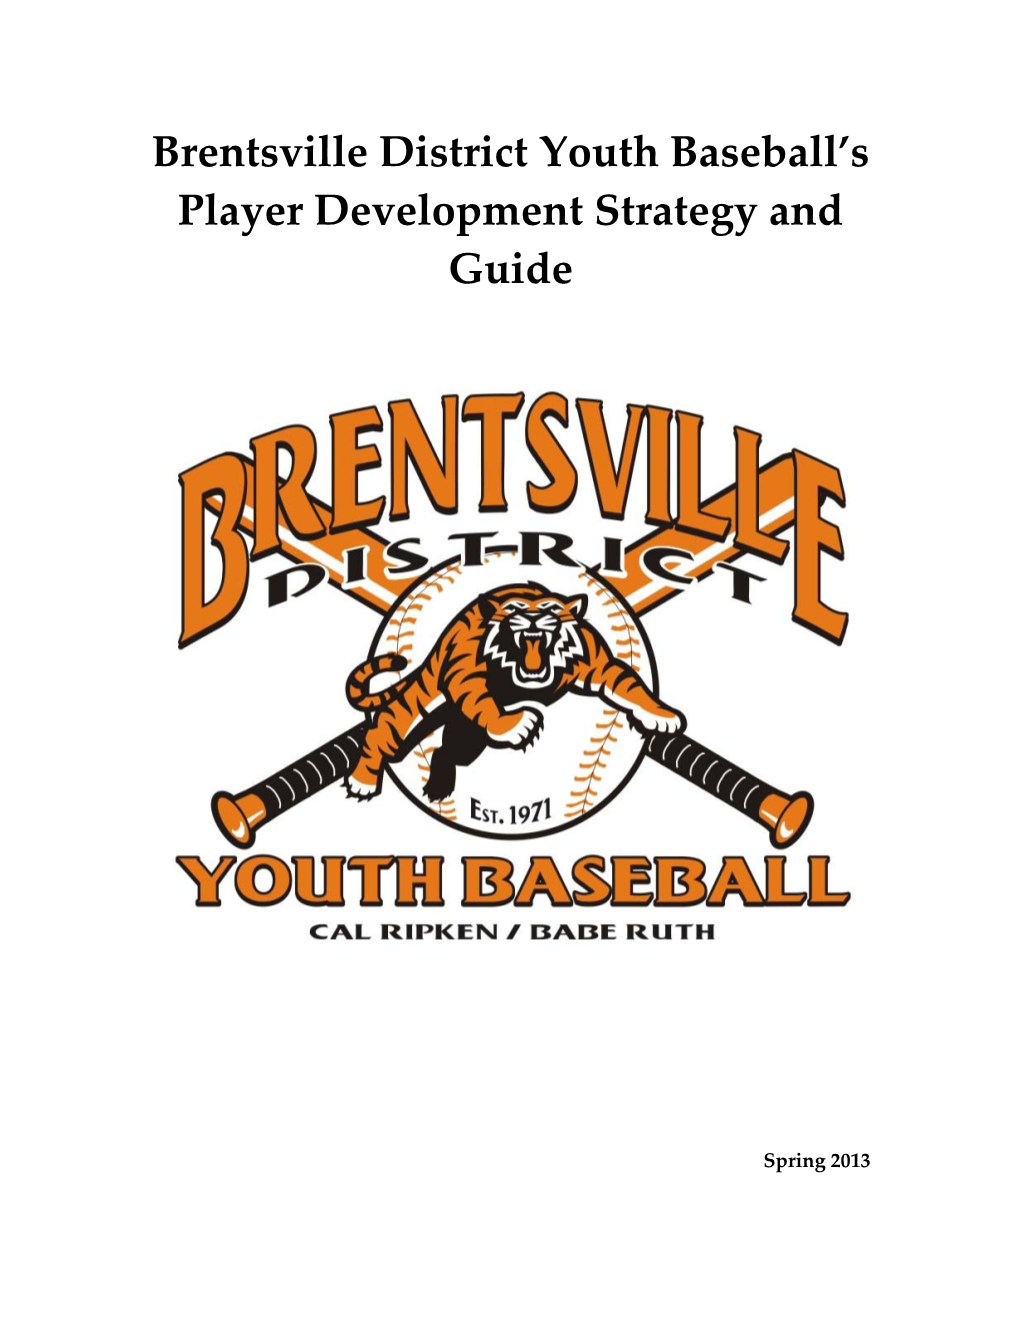 Brentsville District Youth Baseball's Player Development Strategy and Guide